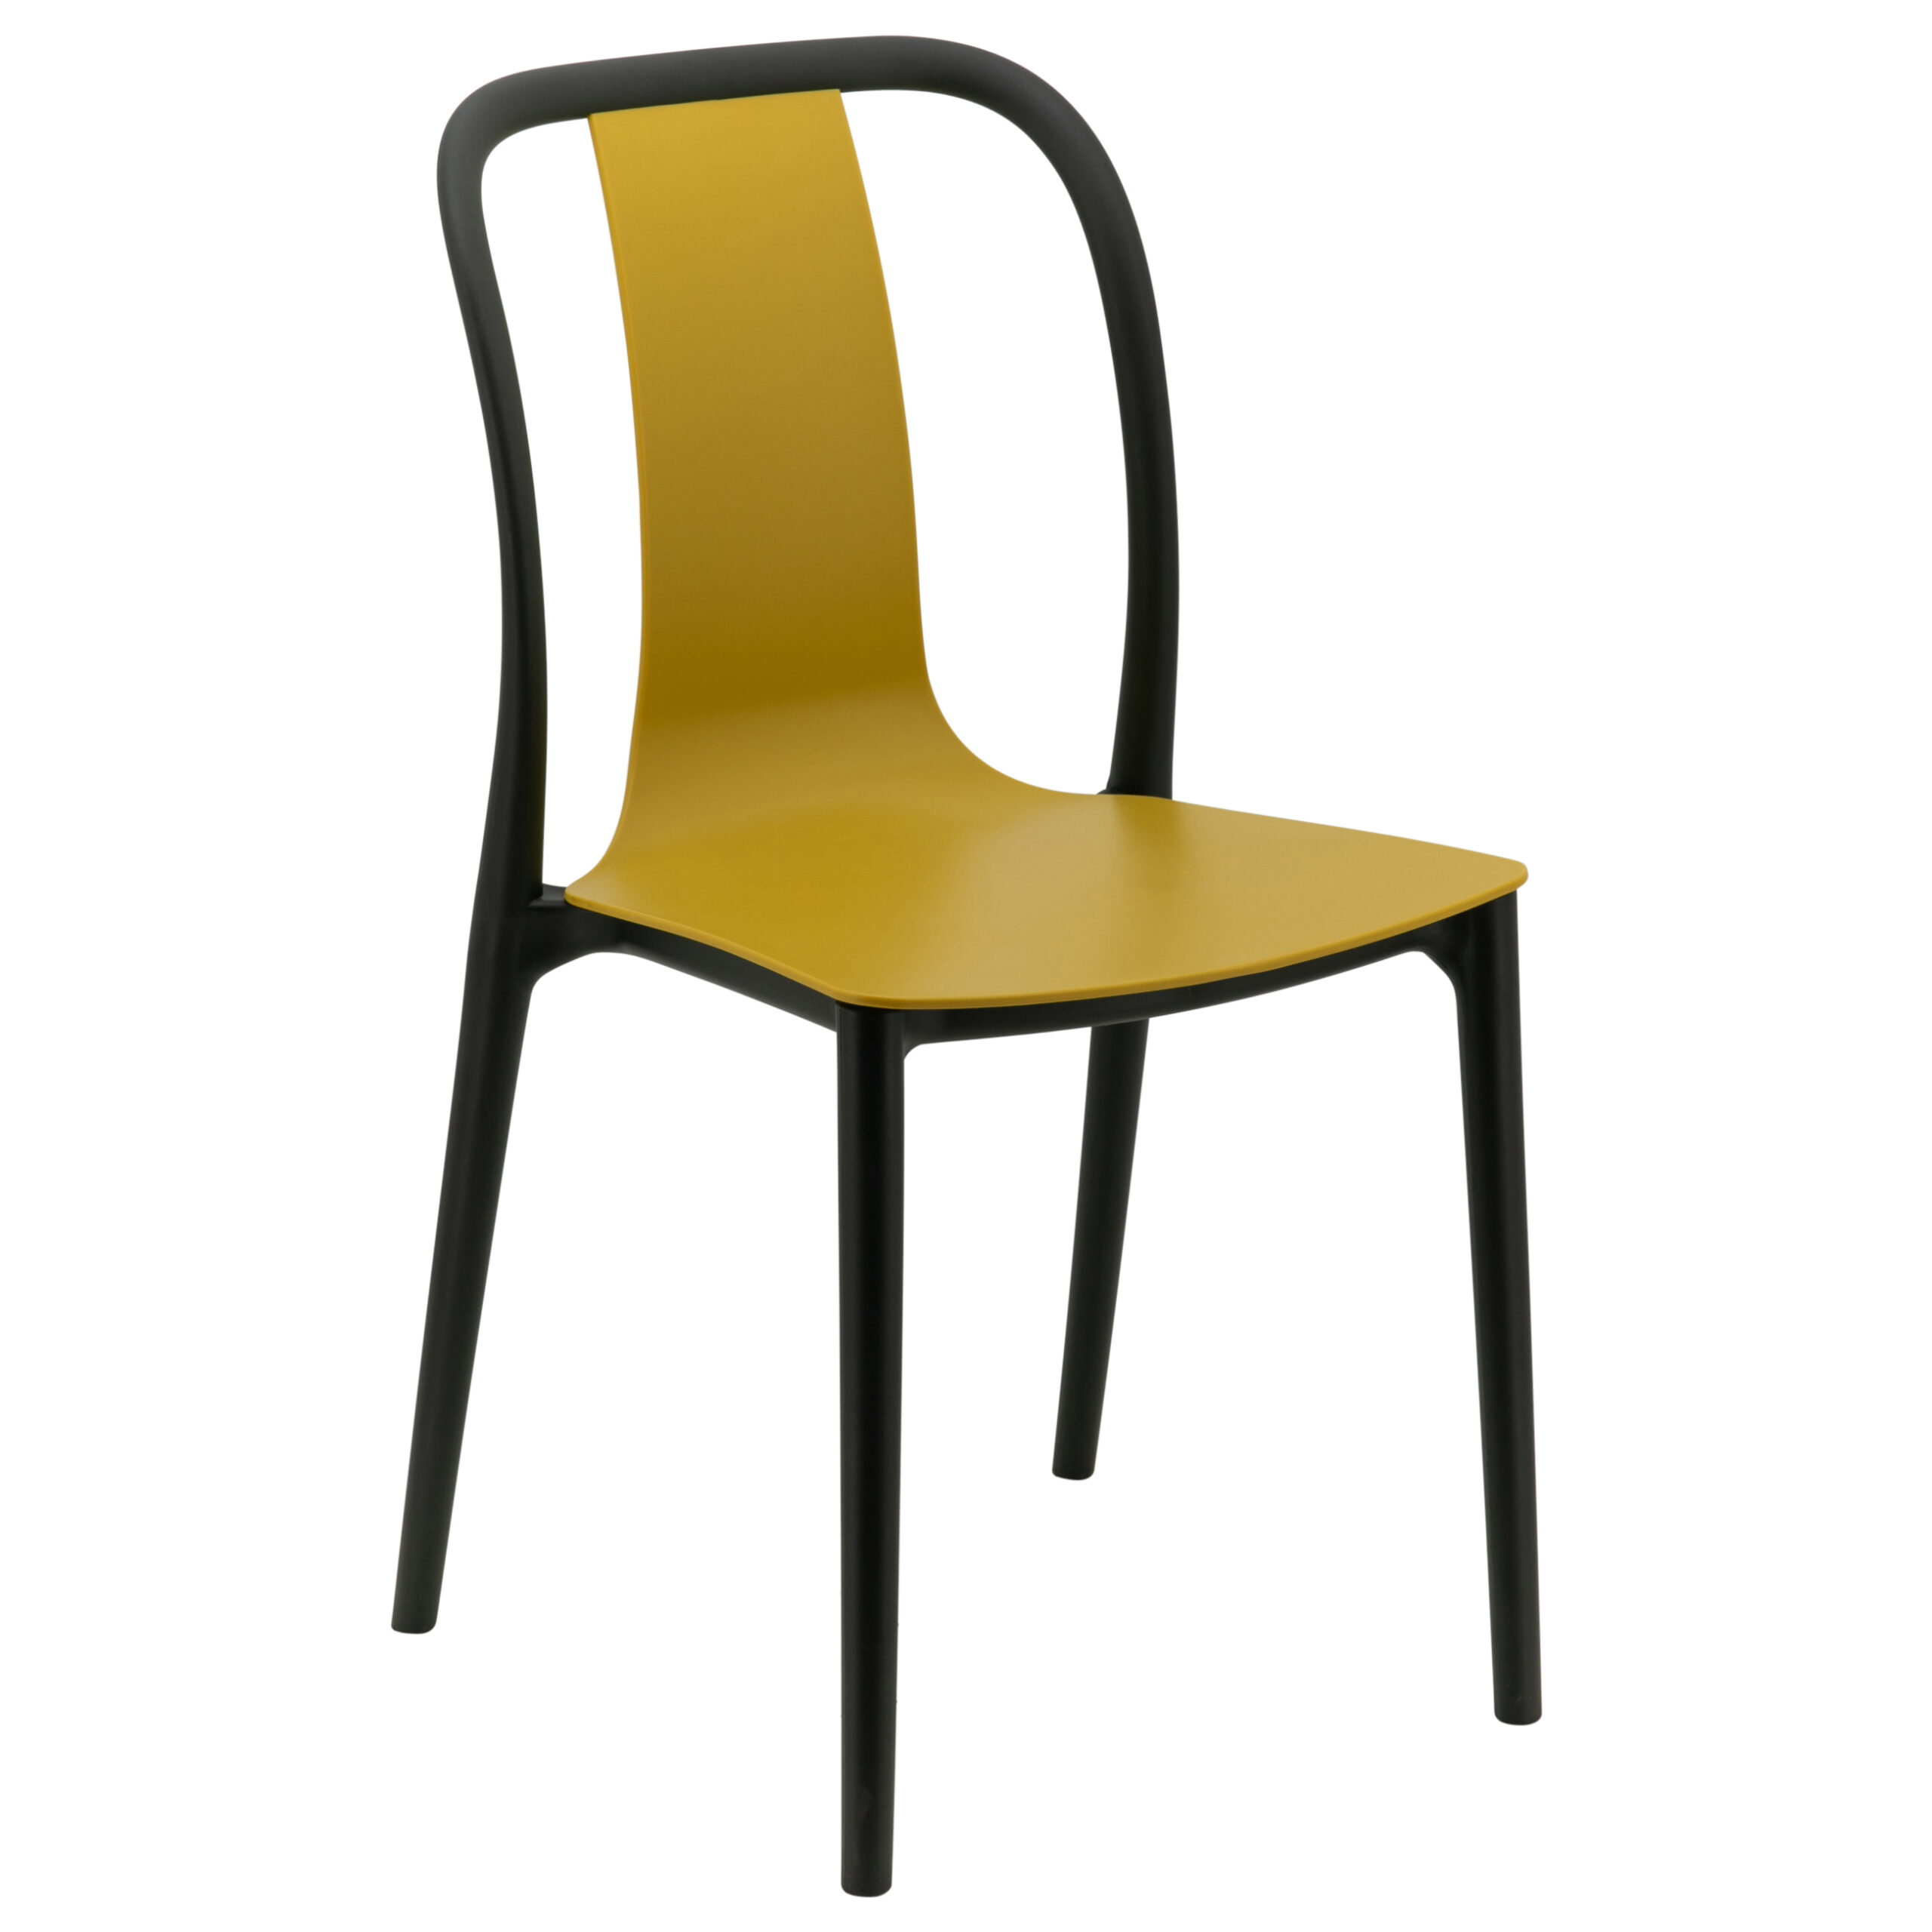 Emma Chair in Black and Mustard